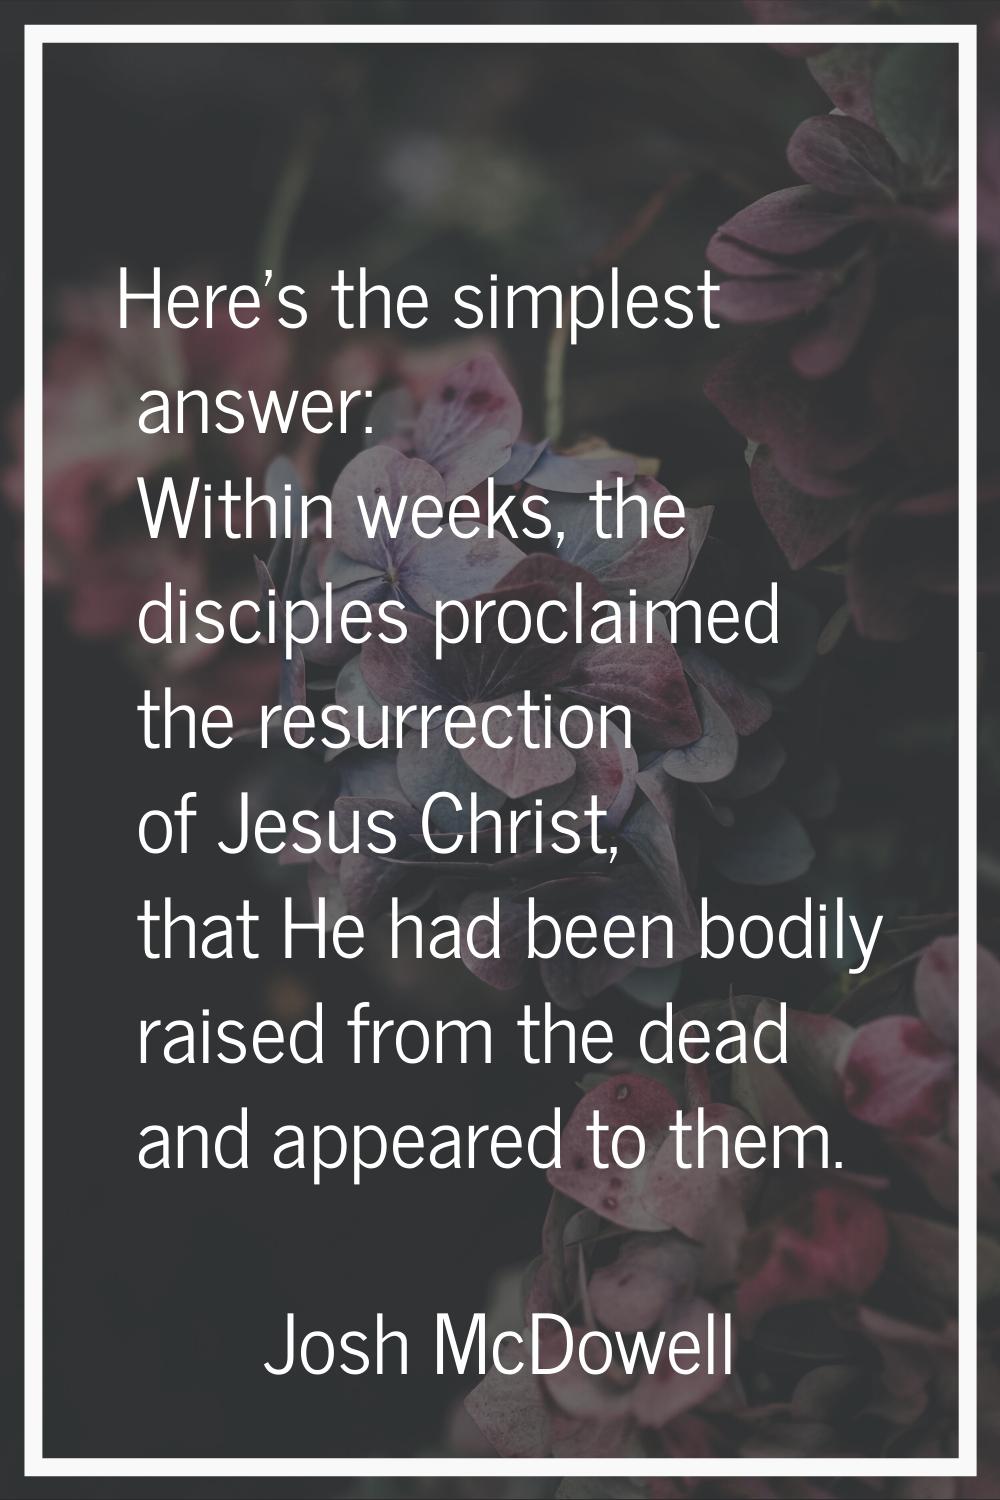 Here's the simplest answer: Within weeks, the disciples proclaimed the resurrection of Jesus Christ